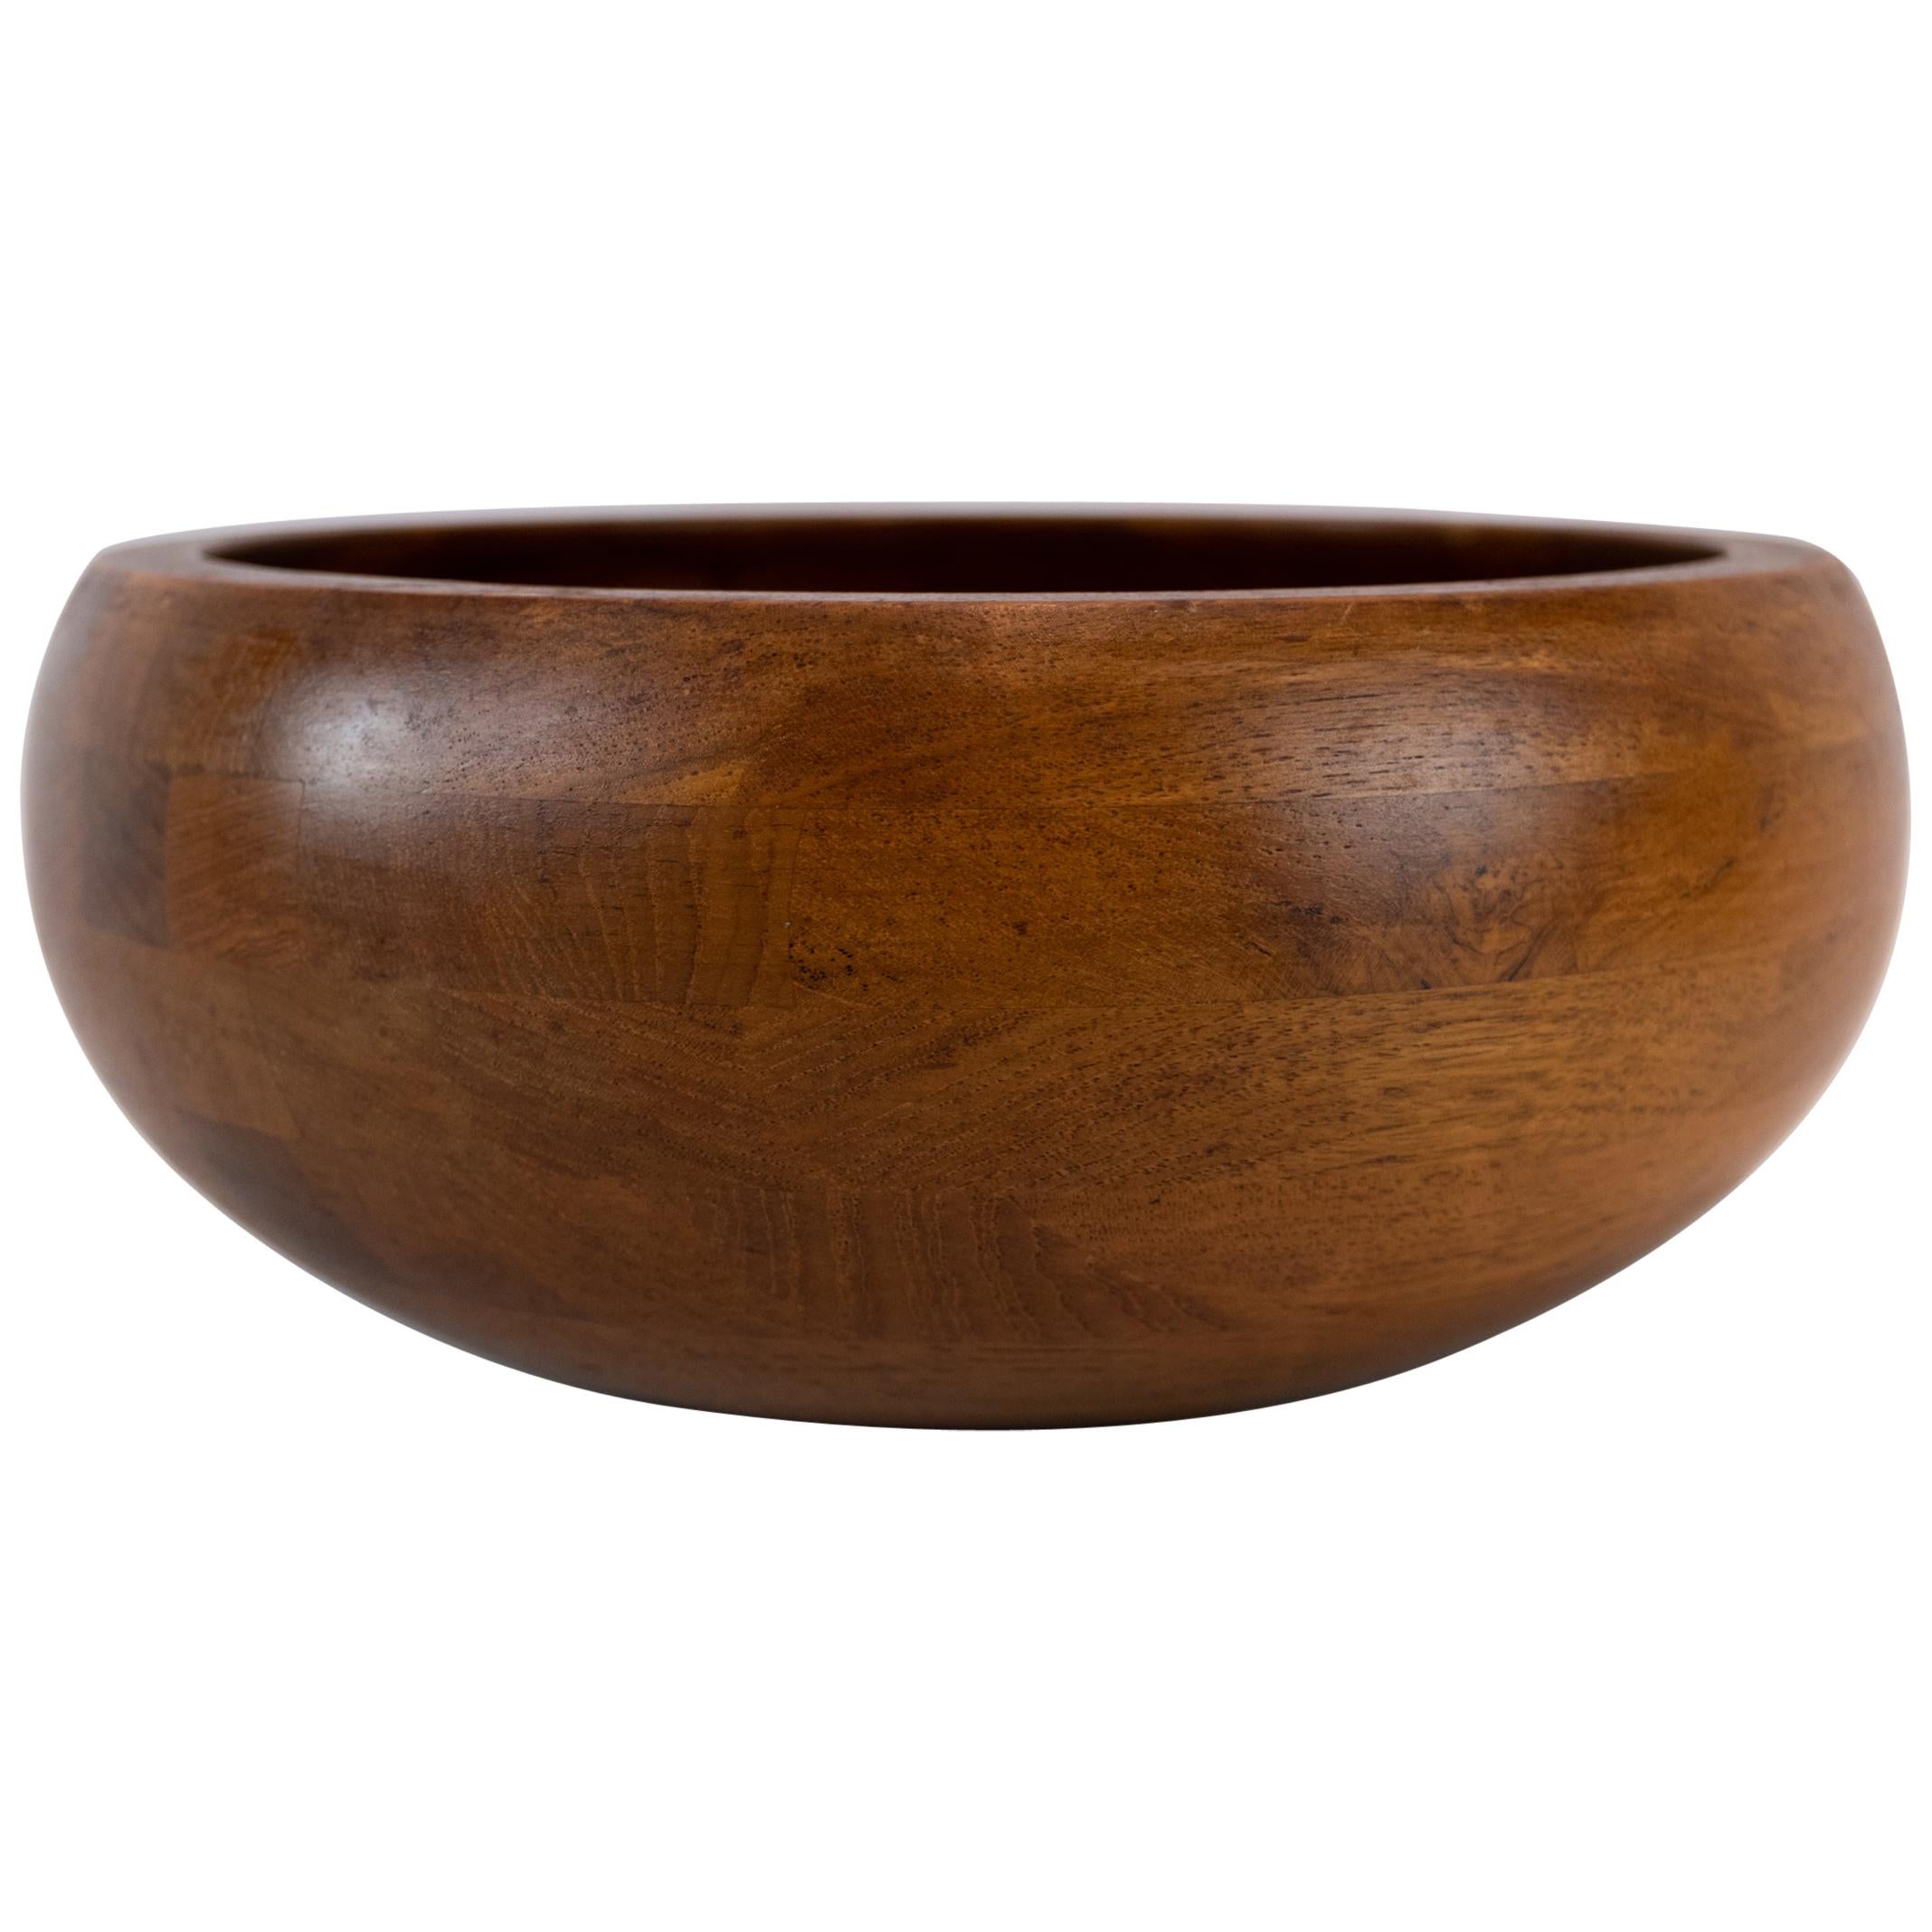 Bowl in Teak Designed, by Jens Harald Quistgaard from the 1960s